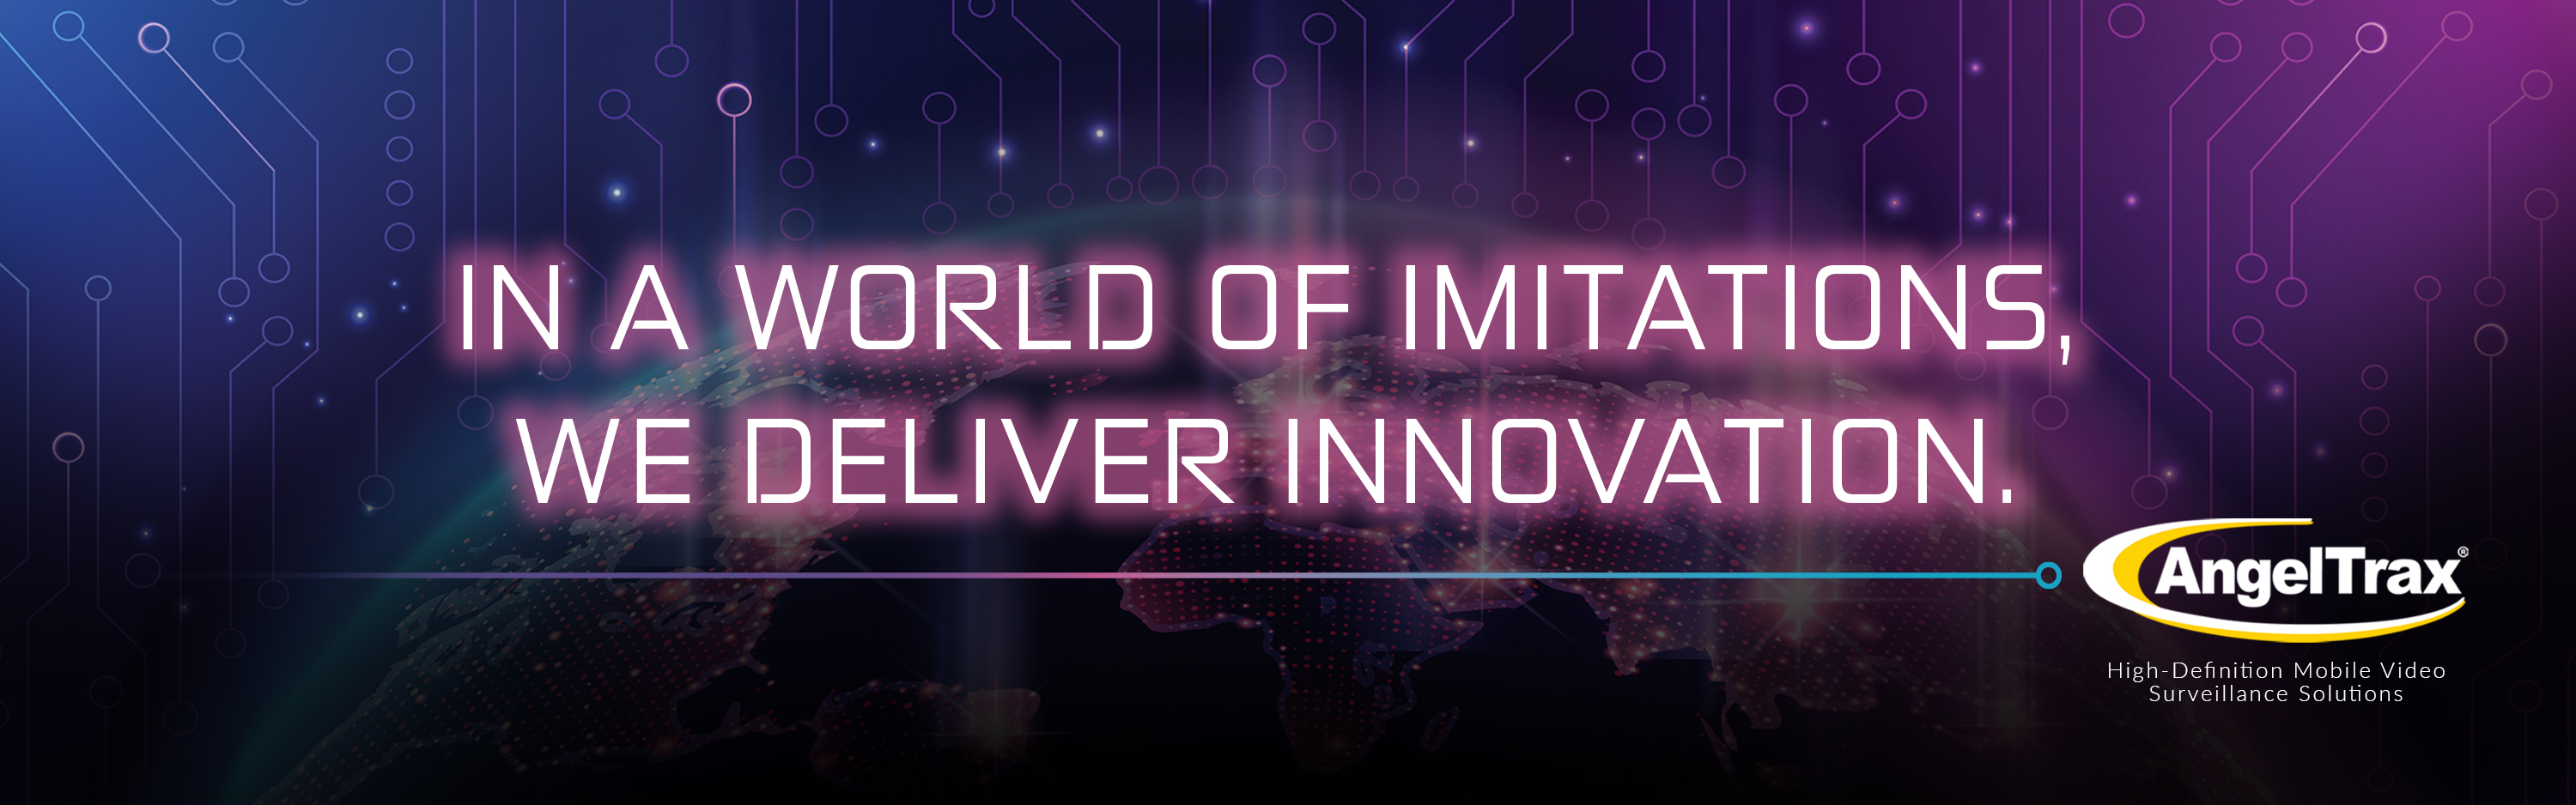 In a world of imitations, we deliver innovation